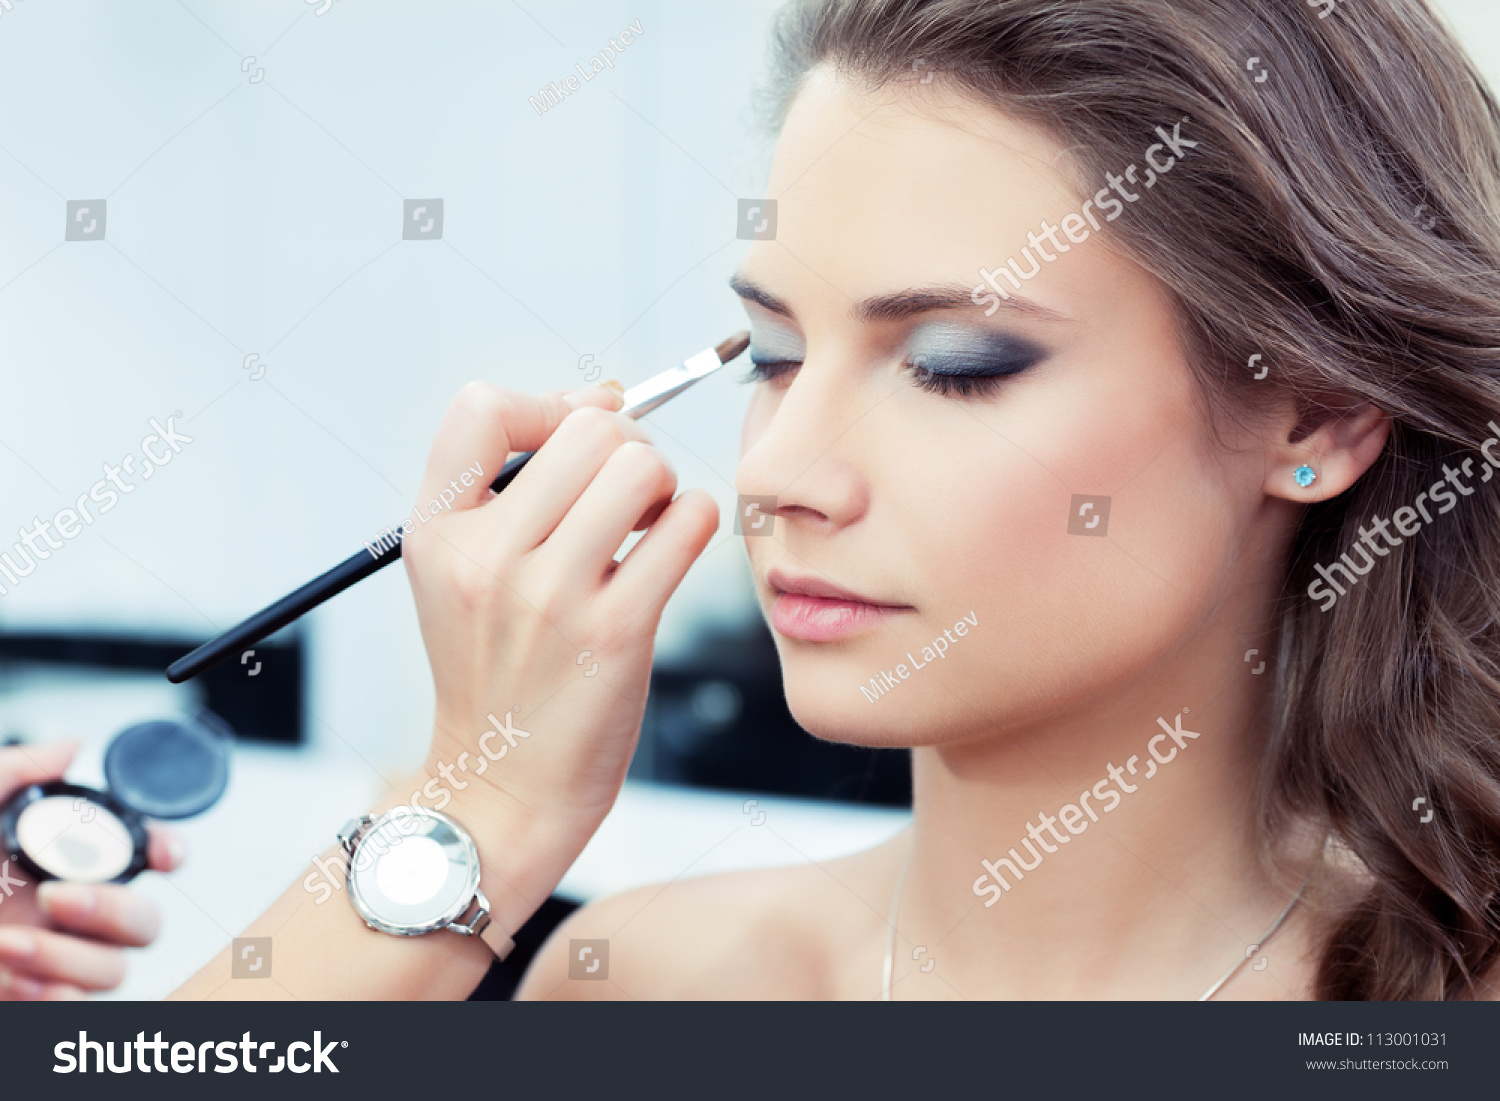 Make-up artist applying bright base color eyeshadow on model's eye and holding a shell with eyeshadow on background, close up #113001031